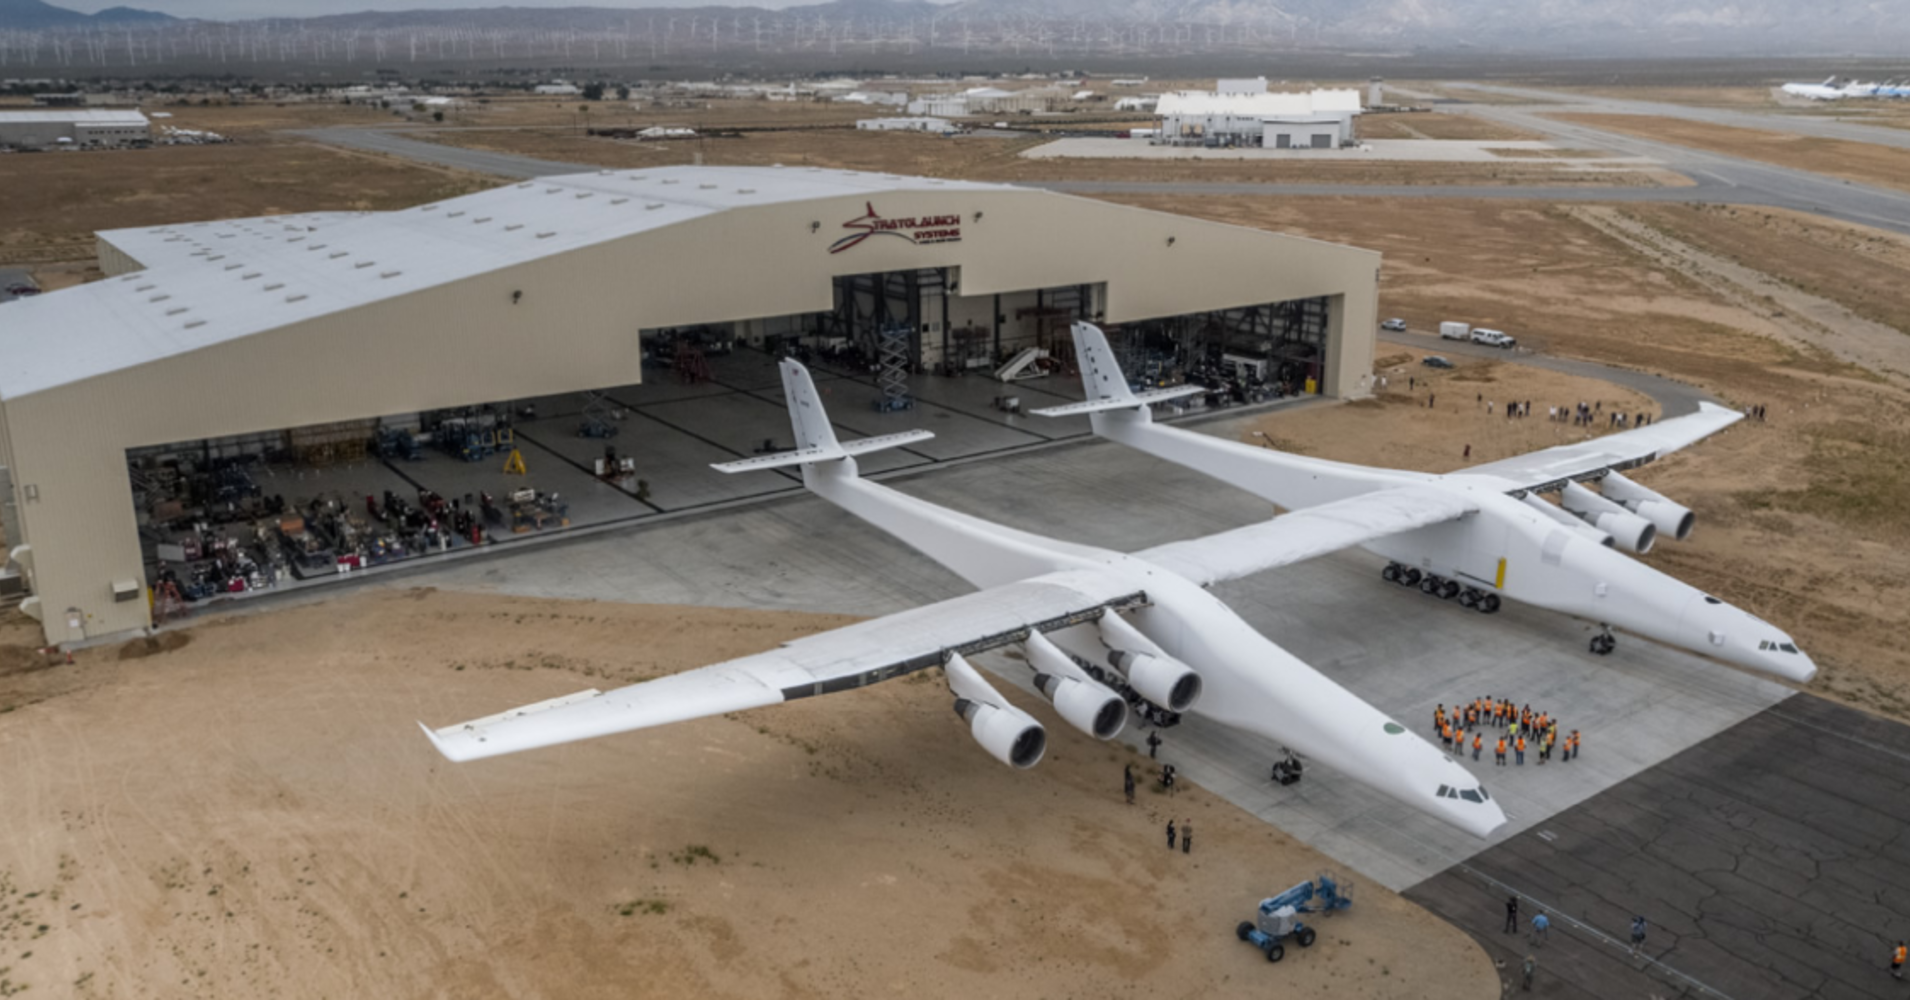 For the first time ever, the Stratolaunch aircraft moved out of the hangar to conduct aircraft fueling tests.